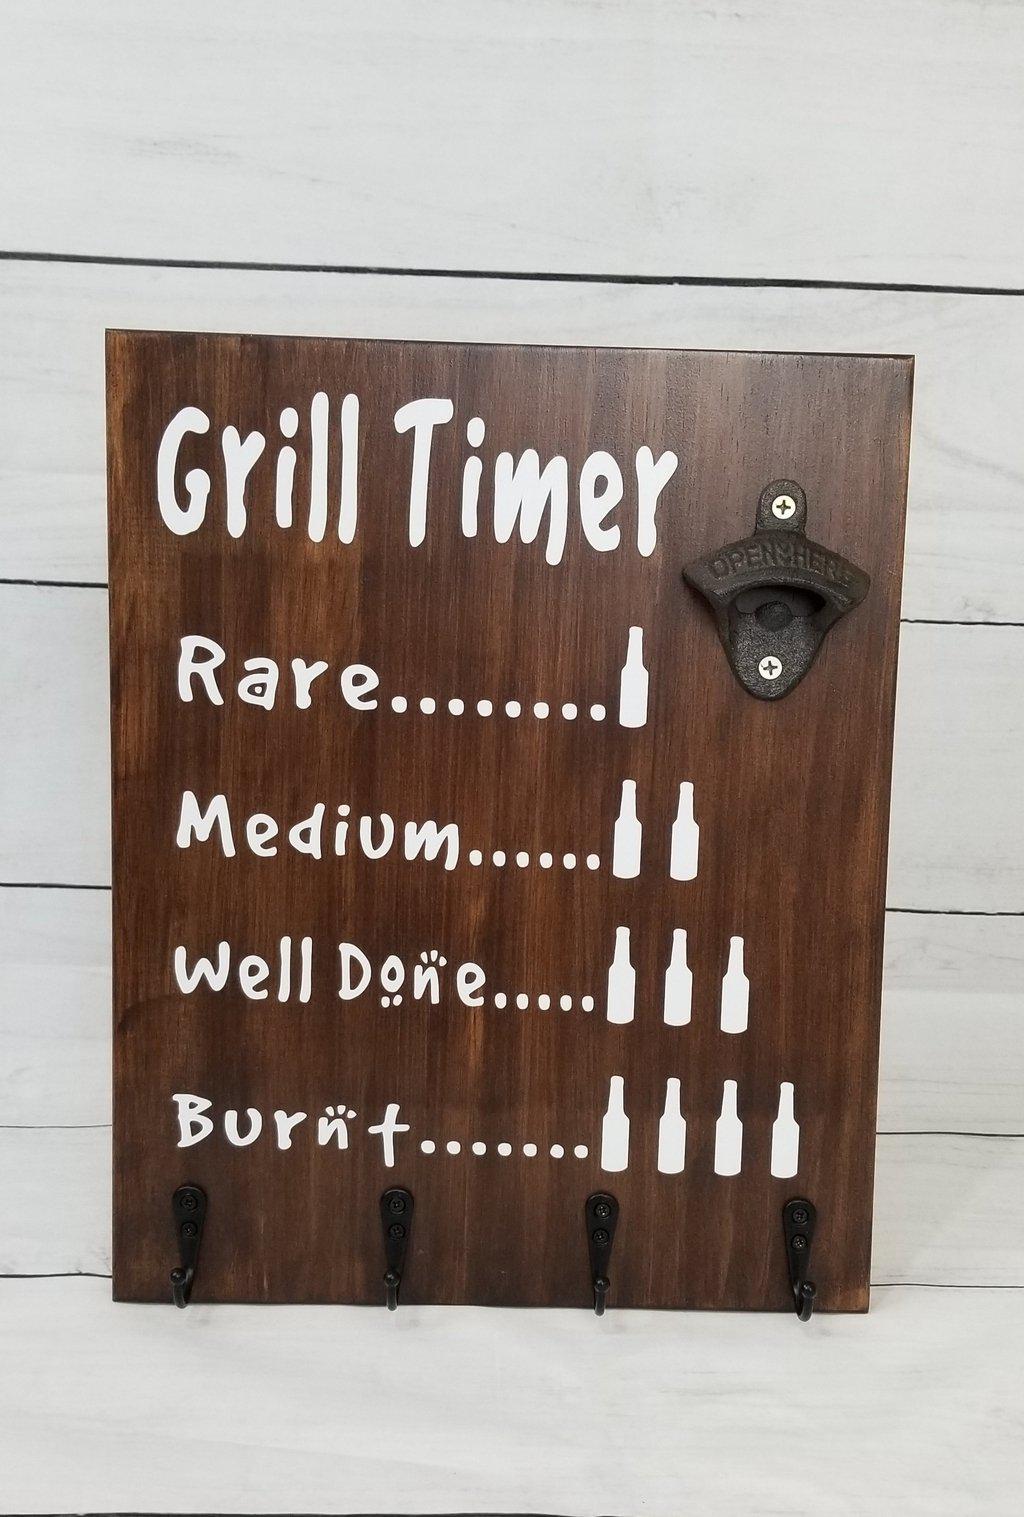 Grill Timer Beer Wood Sign Tool Rack – Elliefont Styles